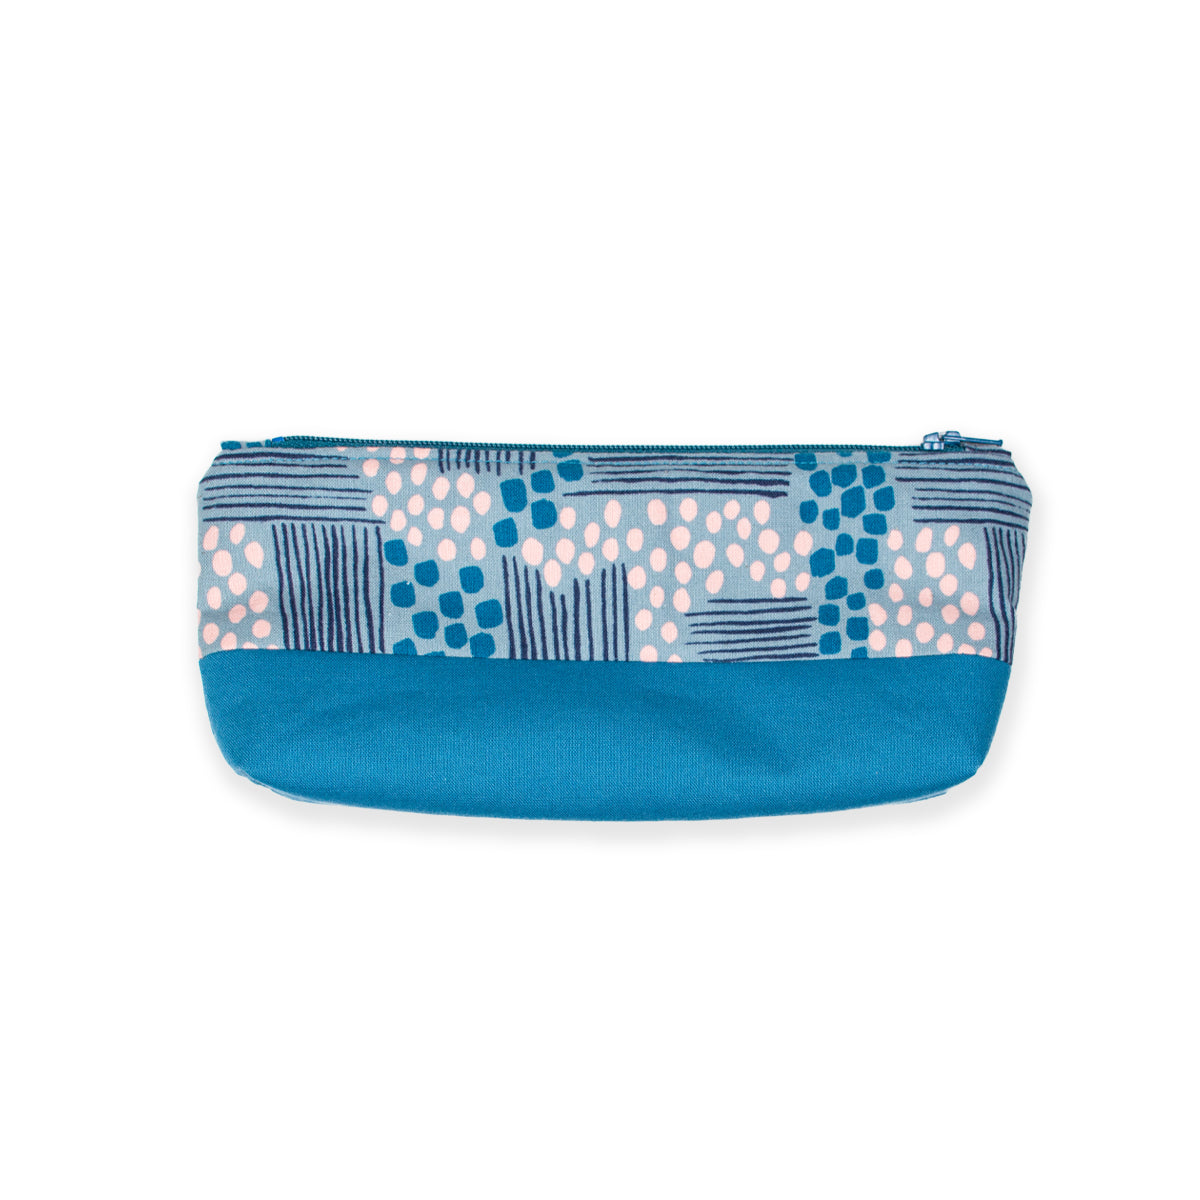 100% cotton pencil case featuring abstract lines and dots representing fields in various shades of blue